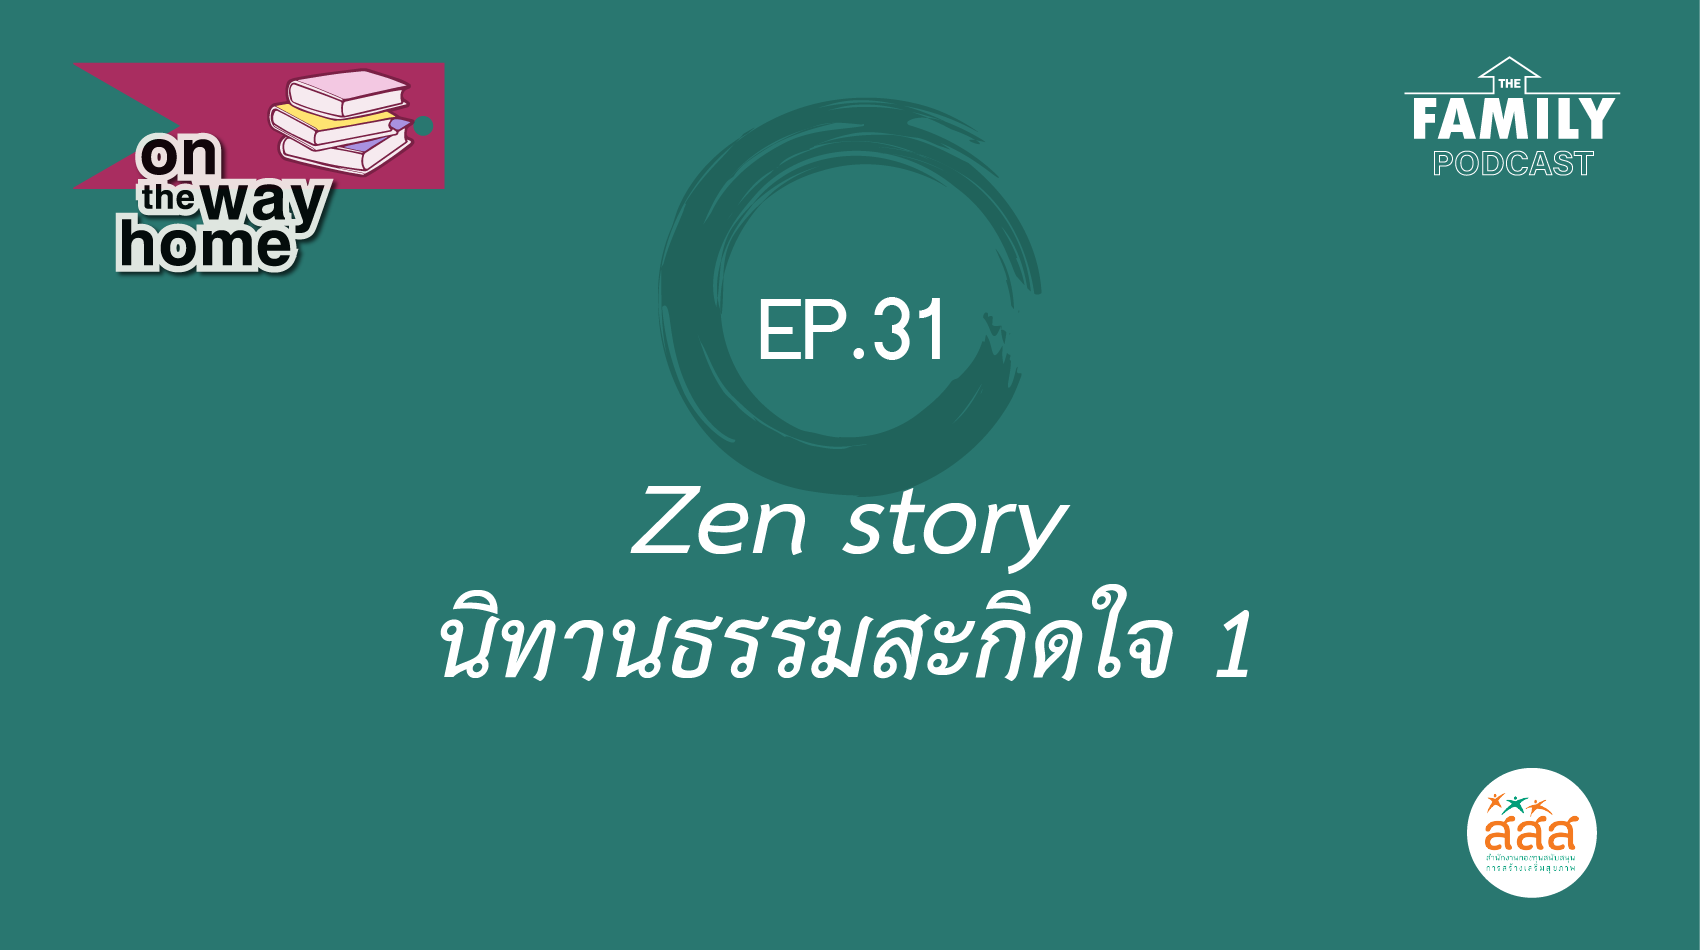 The Family Podcast On the Way Home EP.31 Zen Story นิทานธรรมสะกิดใจ 1